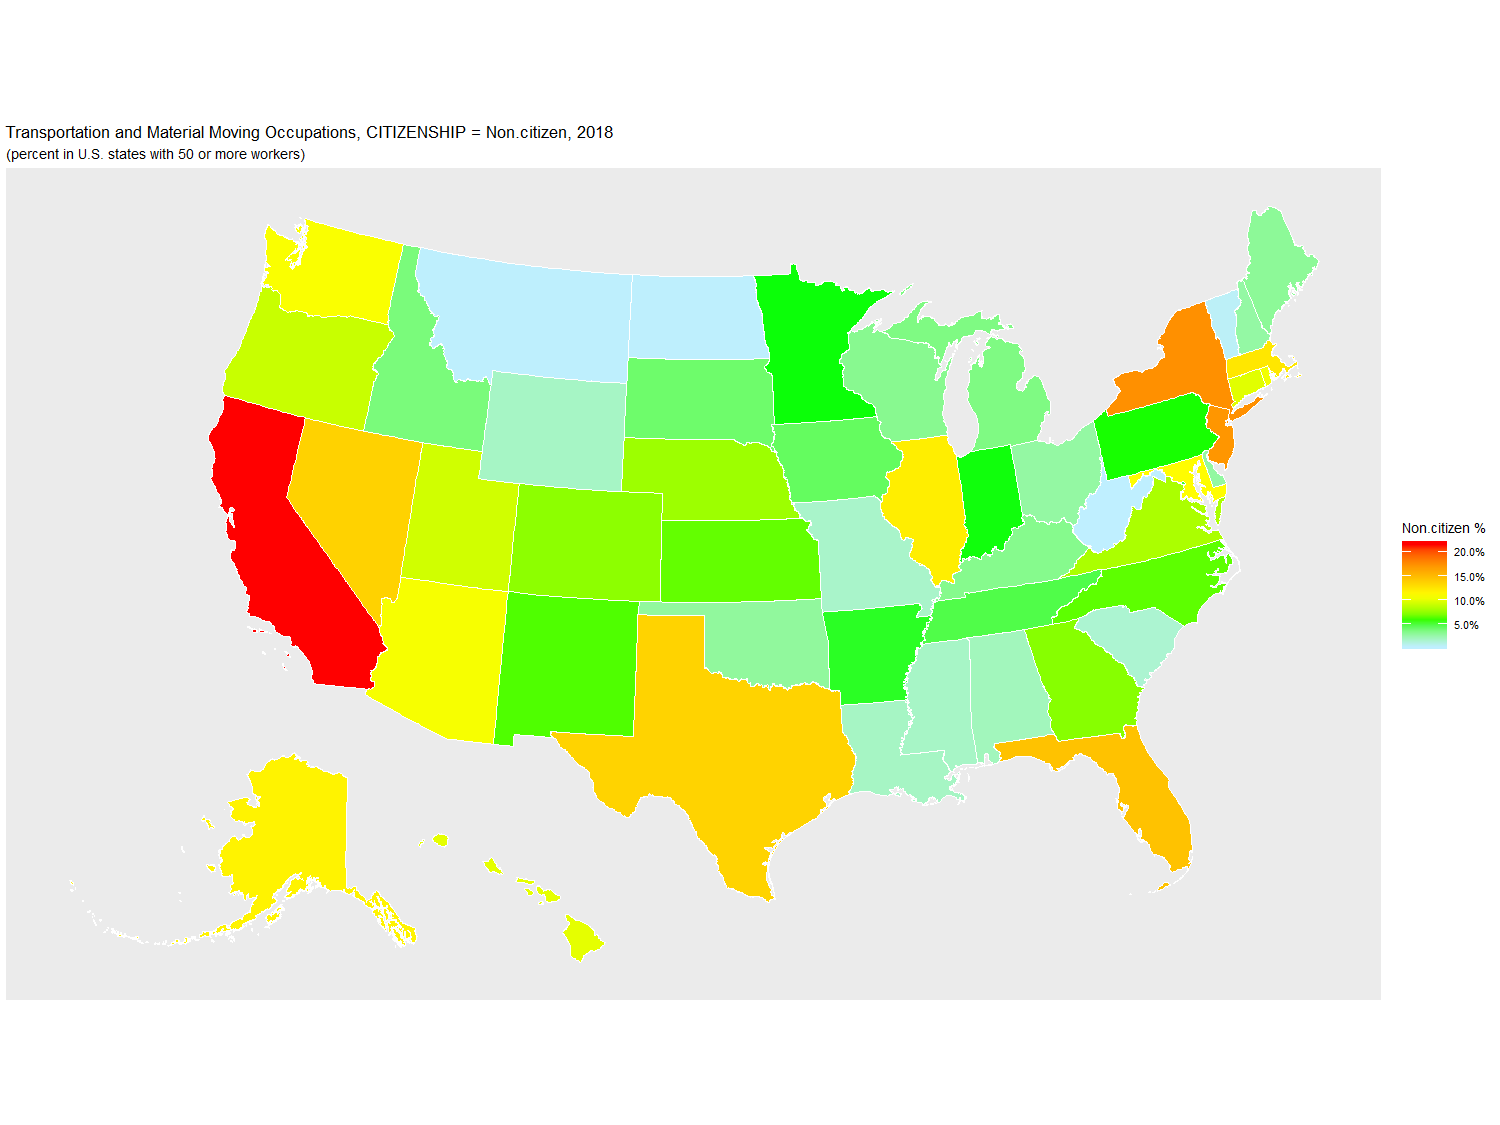 Non-citizen Percentage of Transportation and Material Moving Occupations by U.S. State, 2018